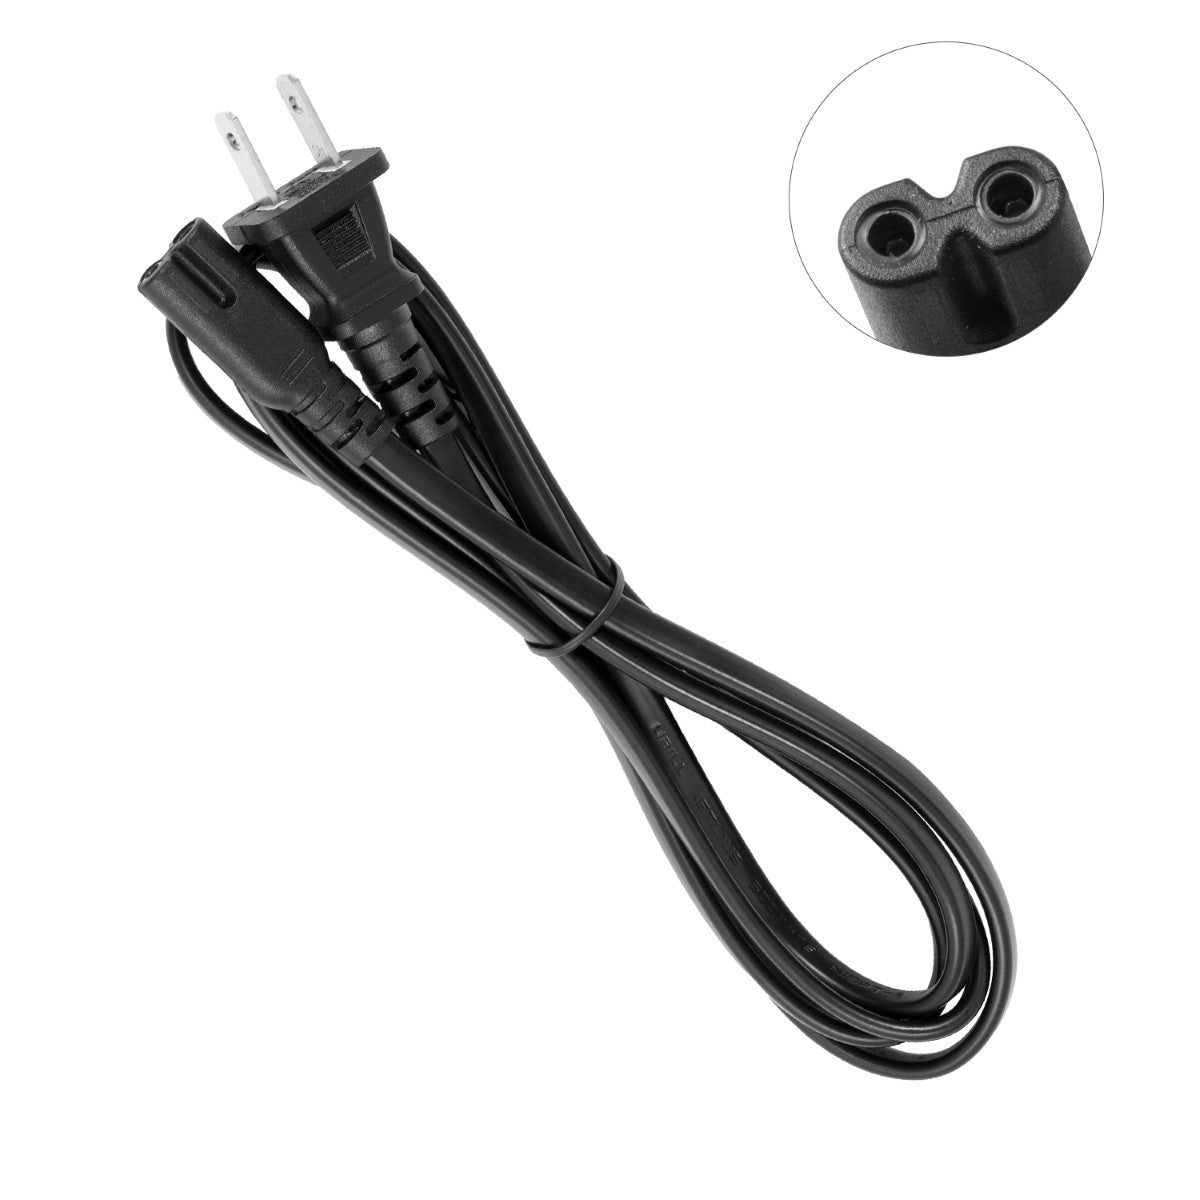 Power Cord for Epson Expression XP-400 Printer.